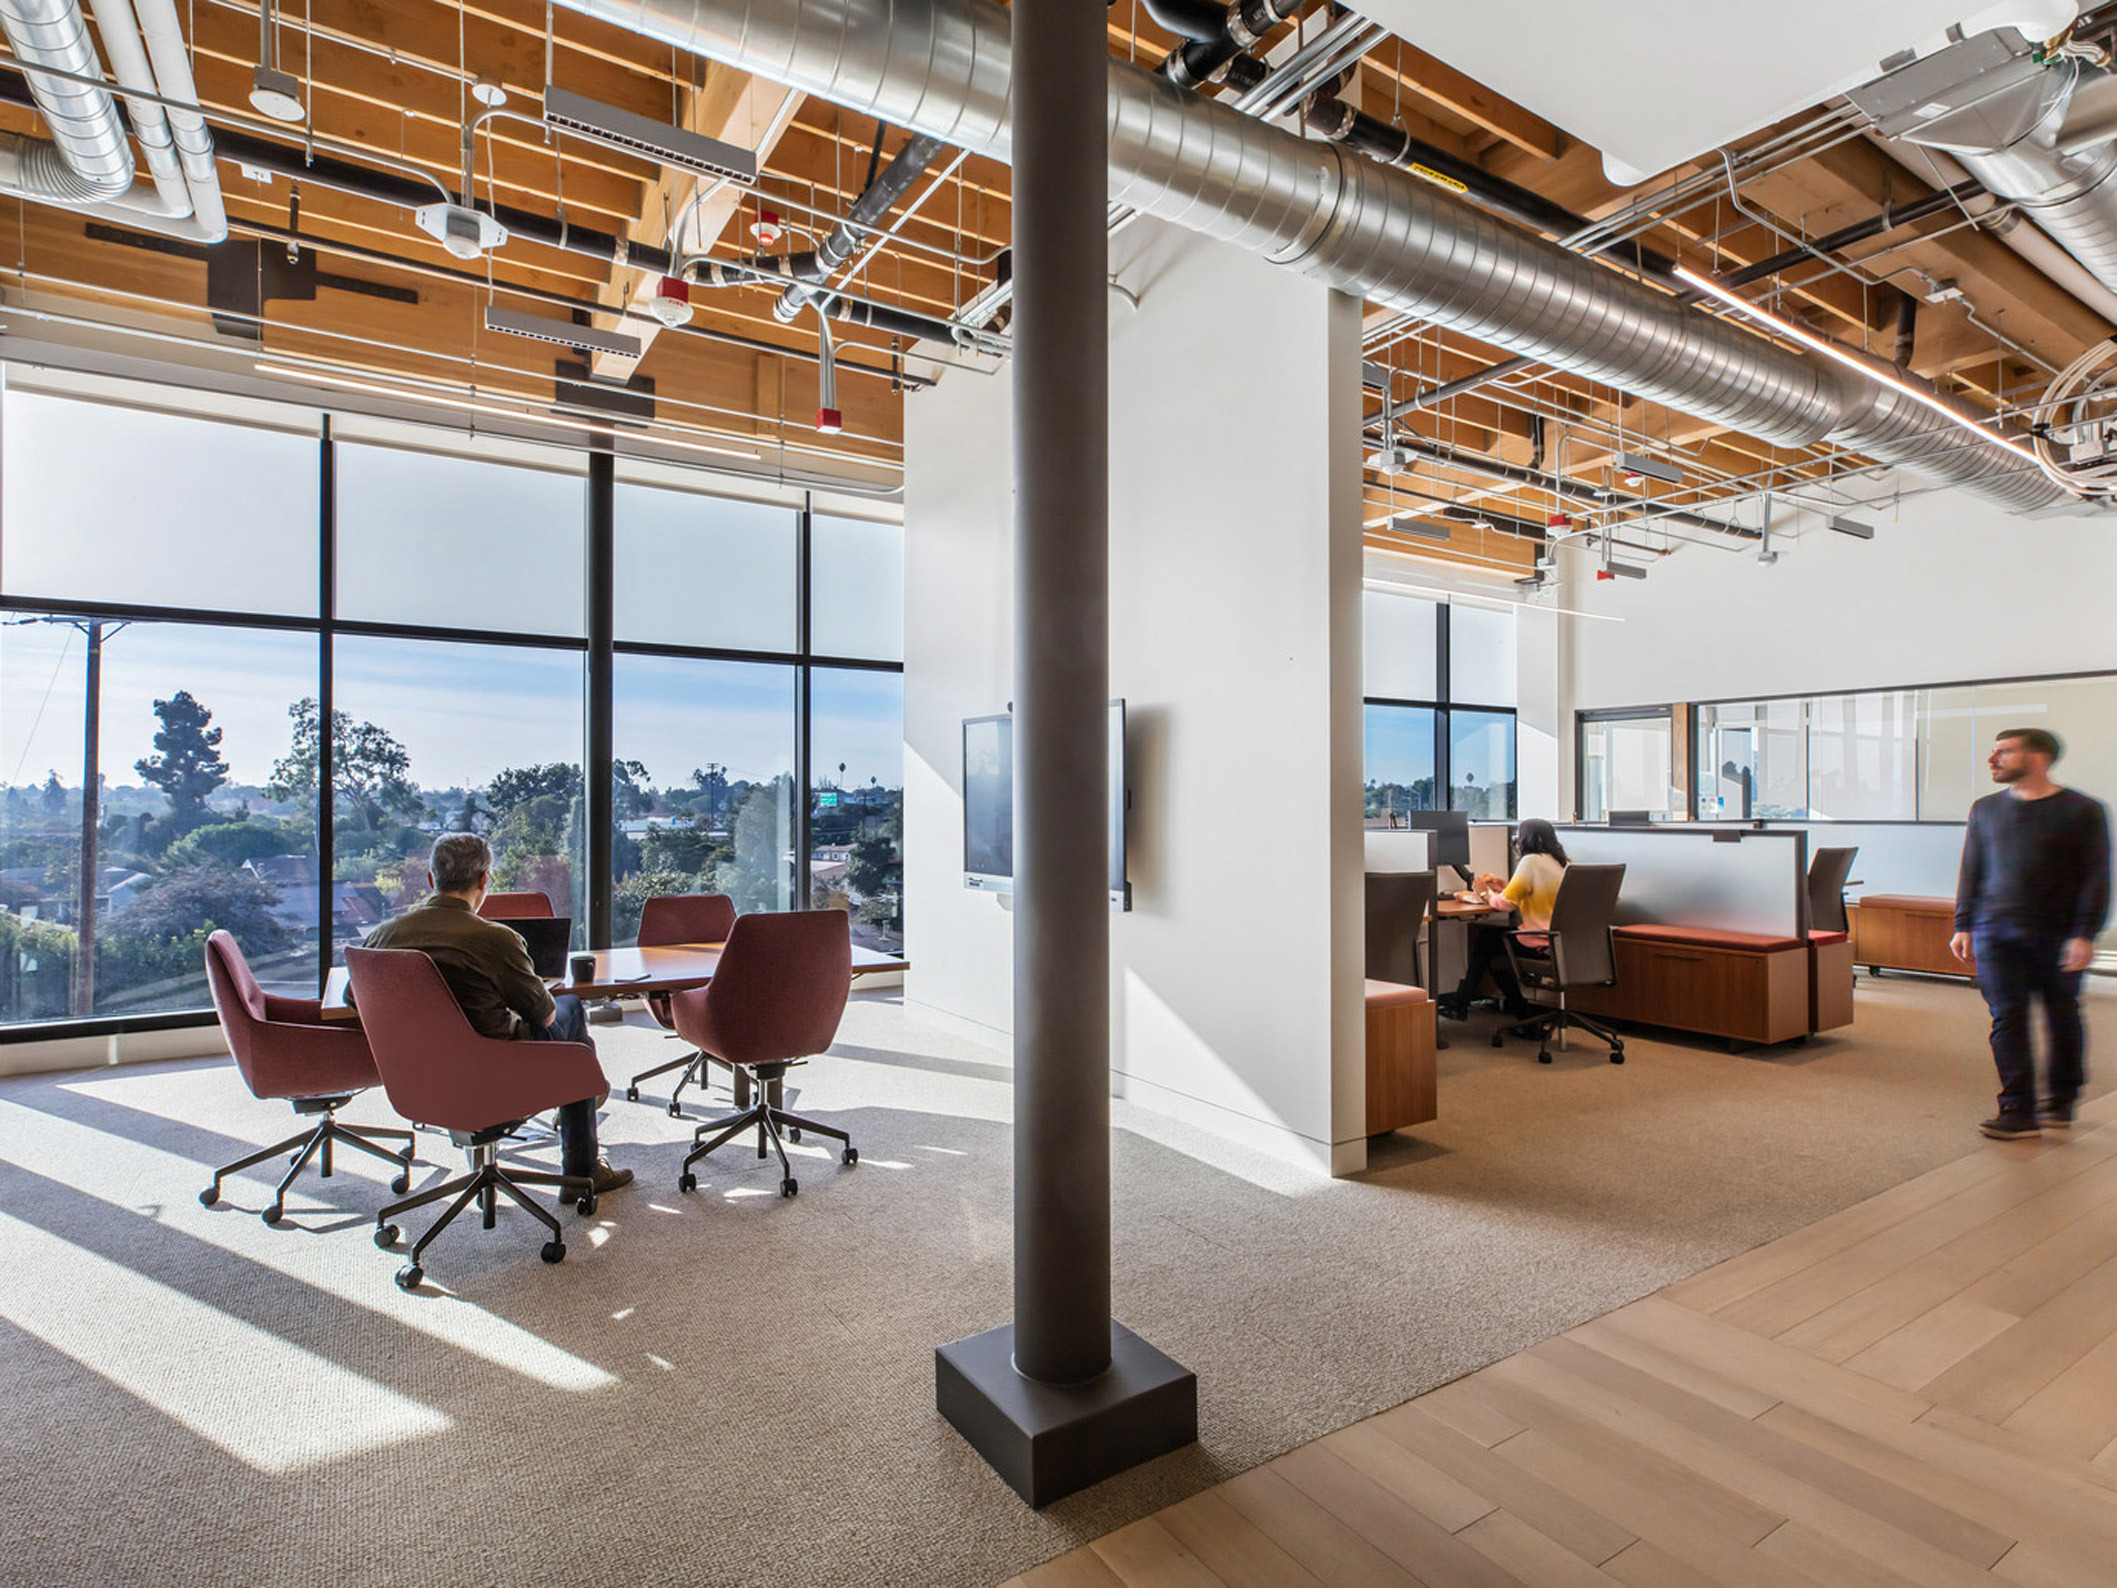 Open-concept office space with exposed ceiling beams and ductwork, featuring floor-to-ceiling windows that provide ample natural light. Red swivel chairs surround a circular meeting table, while employees engage in work at height-adjustable desks set against the room's perimeter.